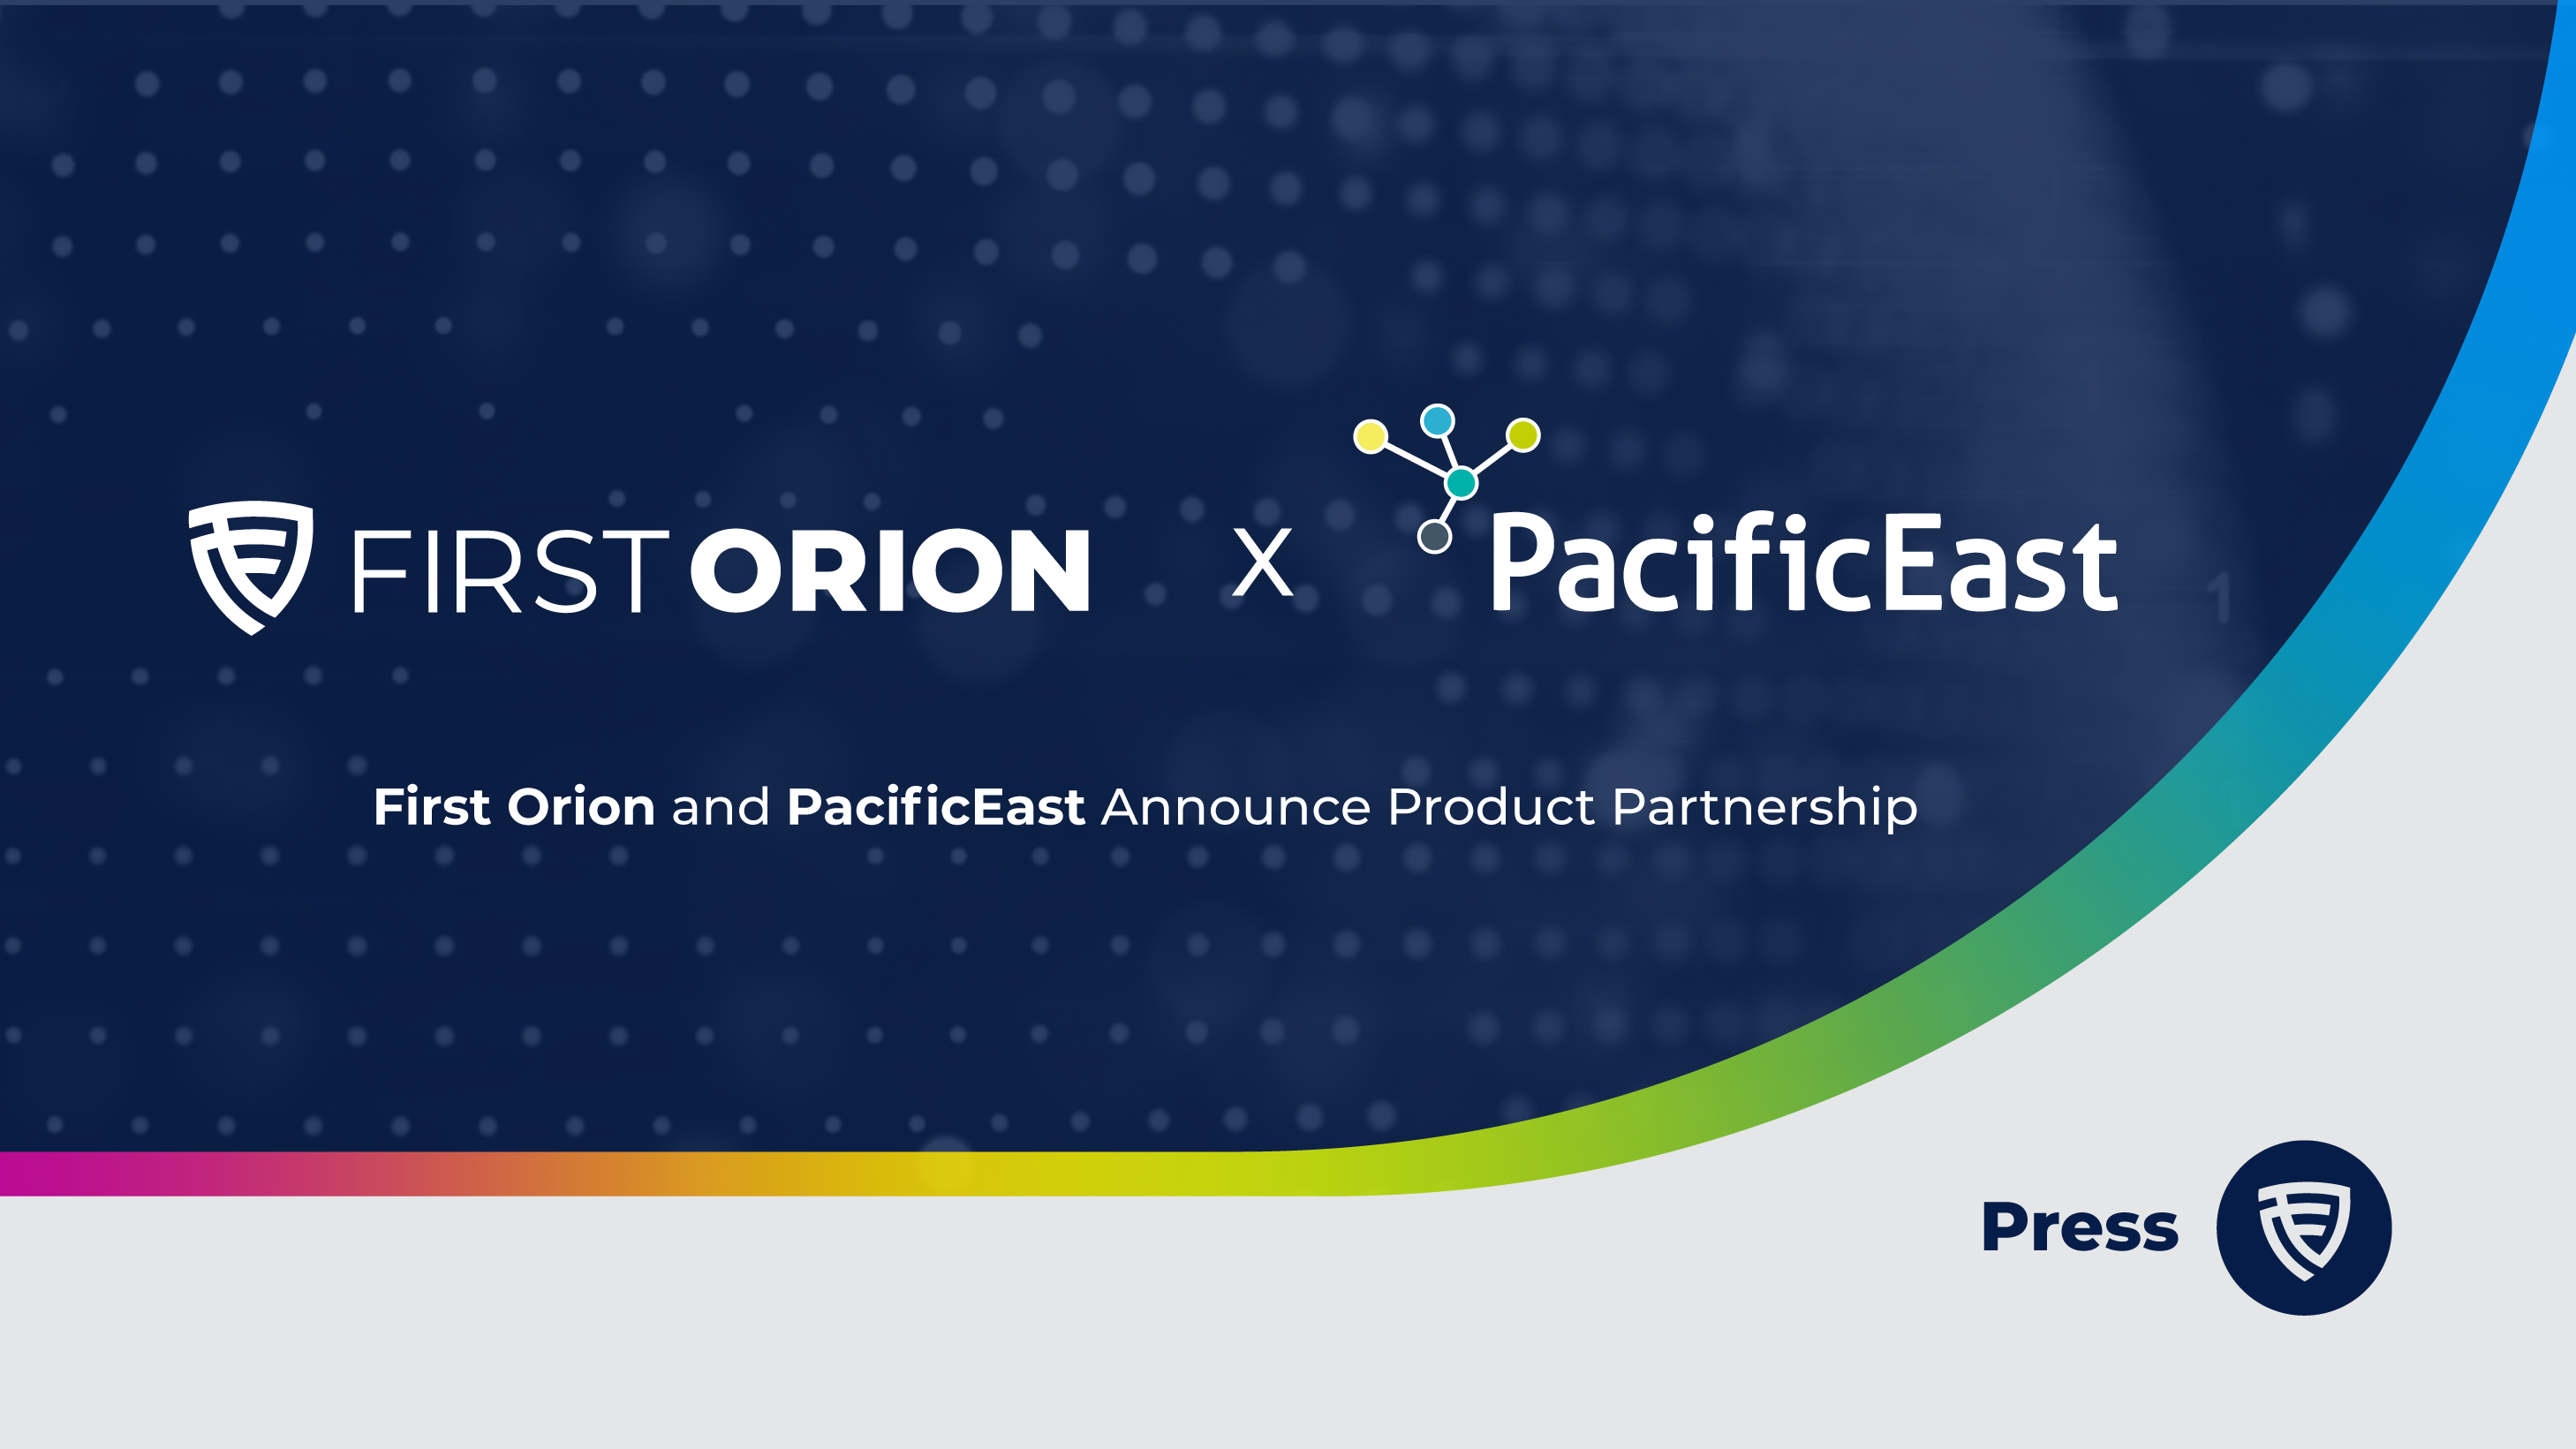 First Orion and Pacific East Announce Partnership